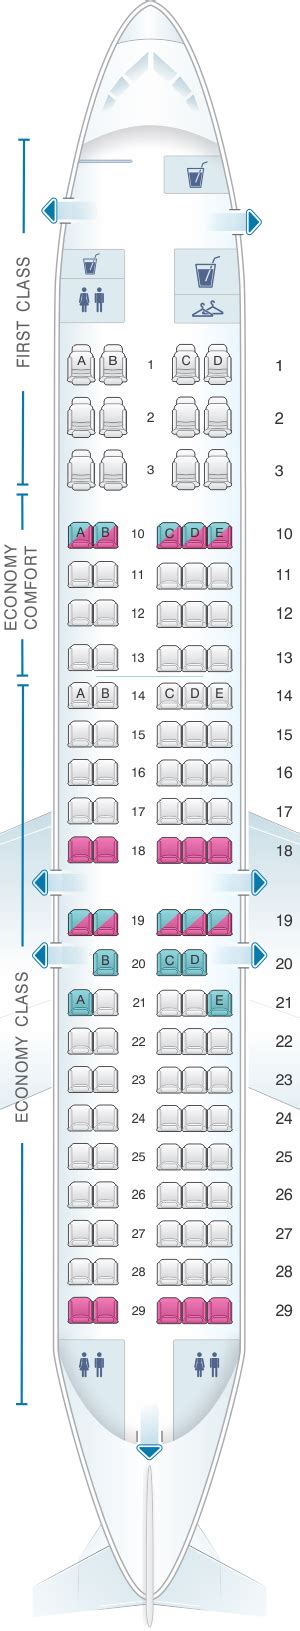 Delta airline seating chart. Overview. This Airbus A330-200 (332) seats 234 passengers and is primarily used on International routes. This next-generation aircraft features 34 flat-bed Delta One seats, 32 Delta Comfort+ seats, and 168 Economy seats. 